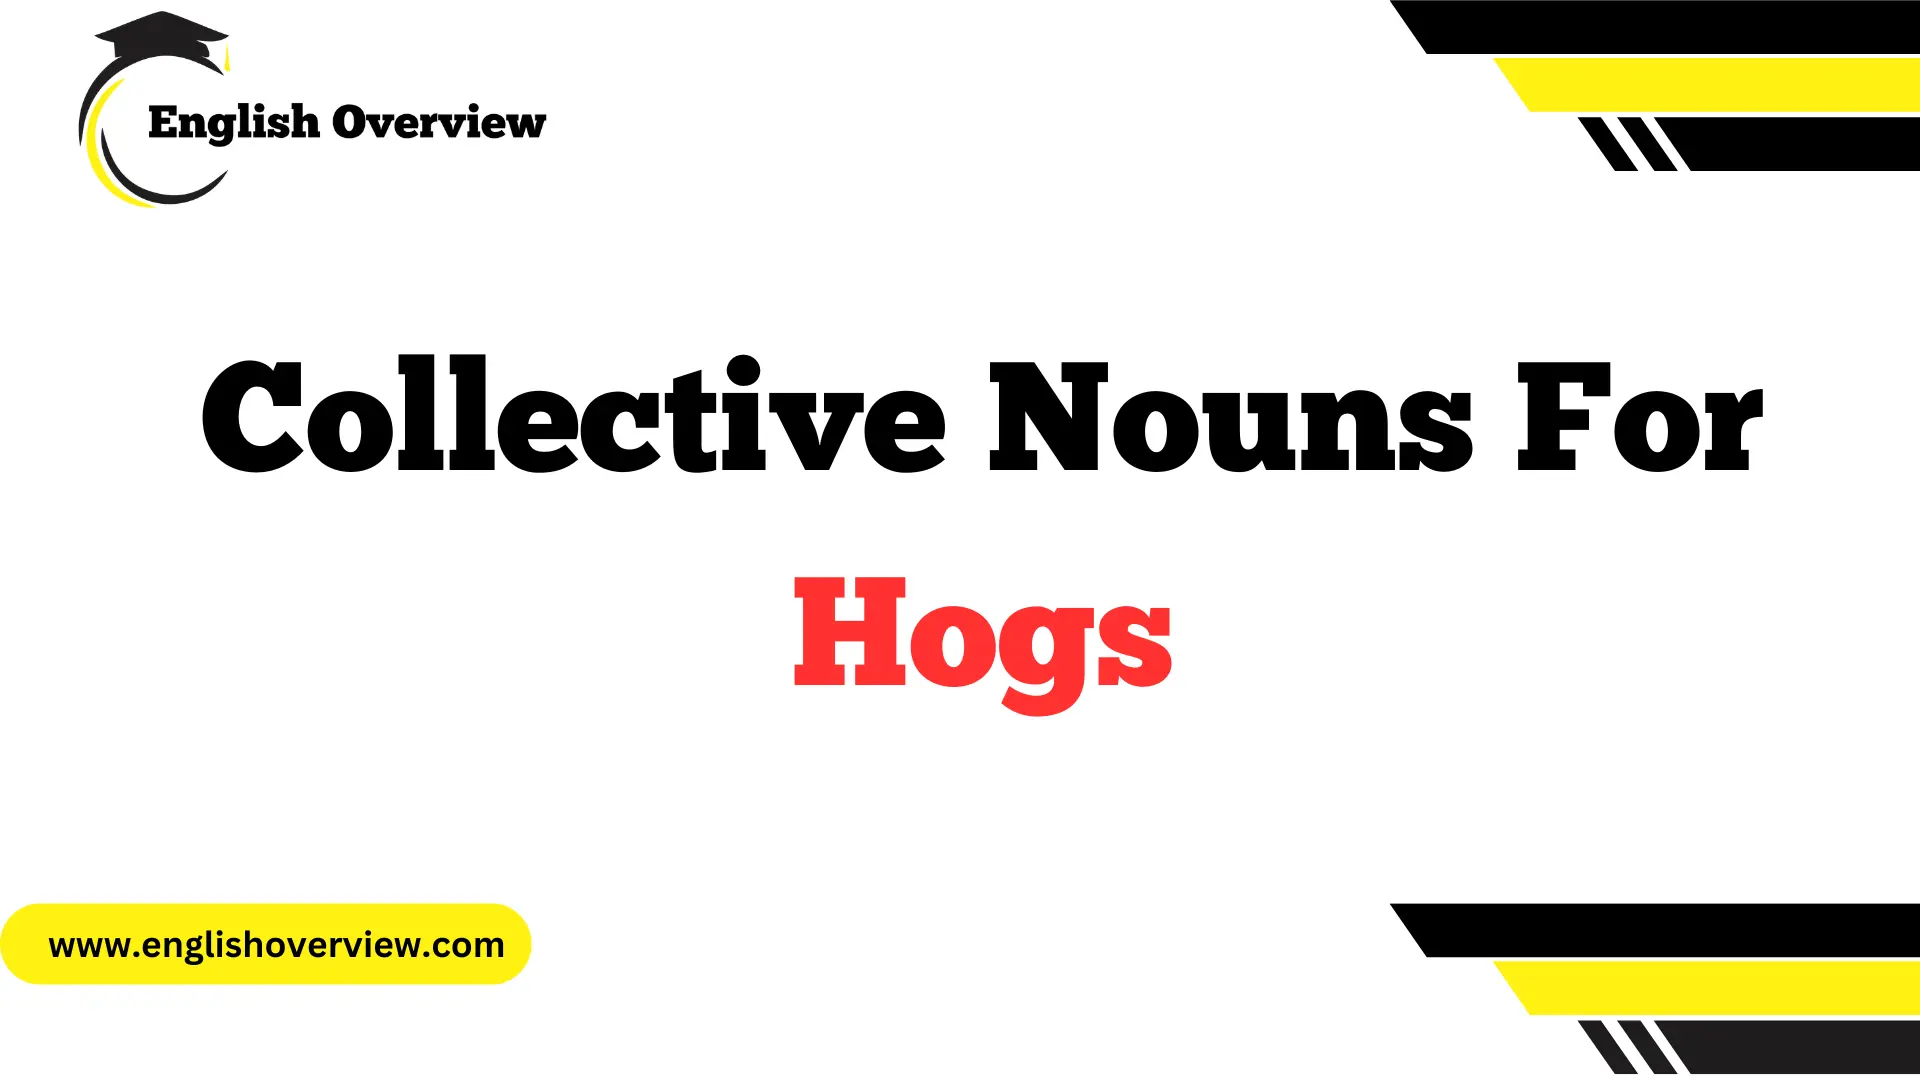 Collective Nouns For Hogs